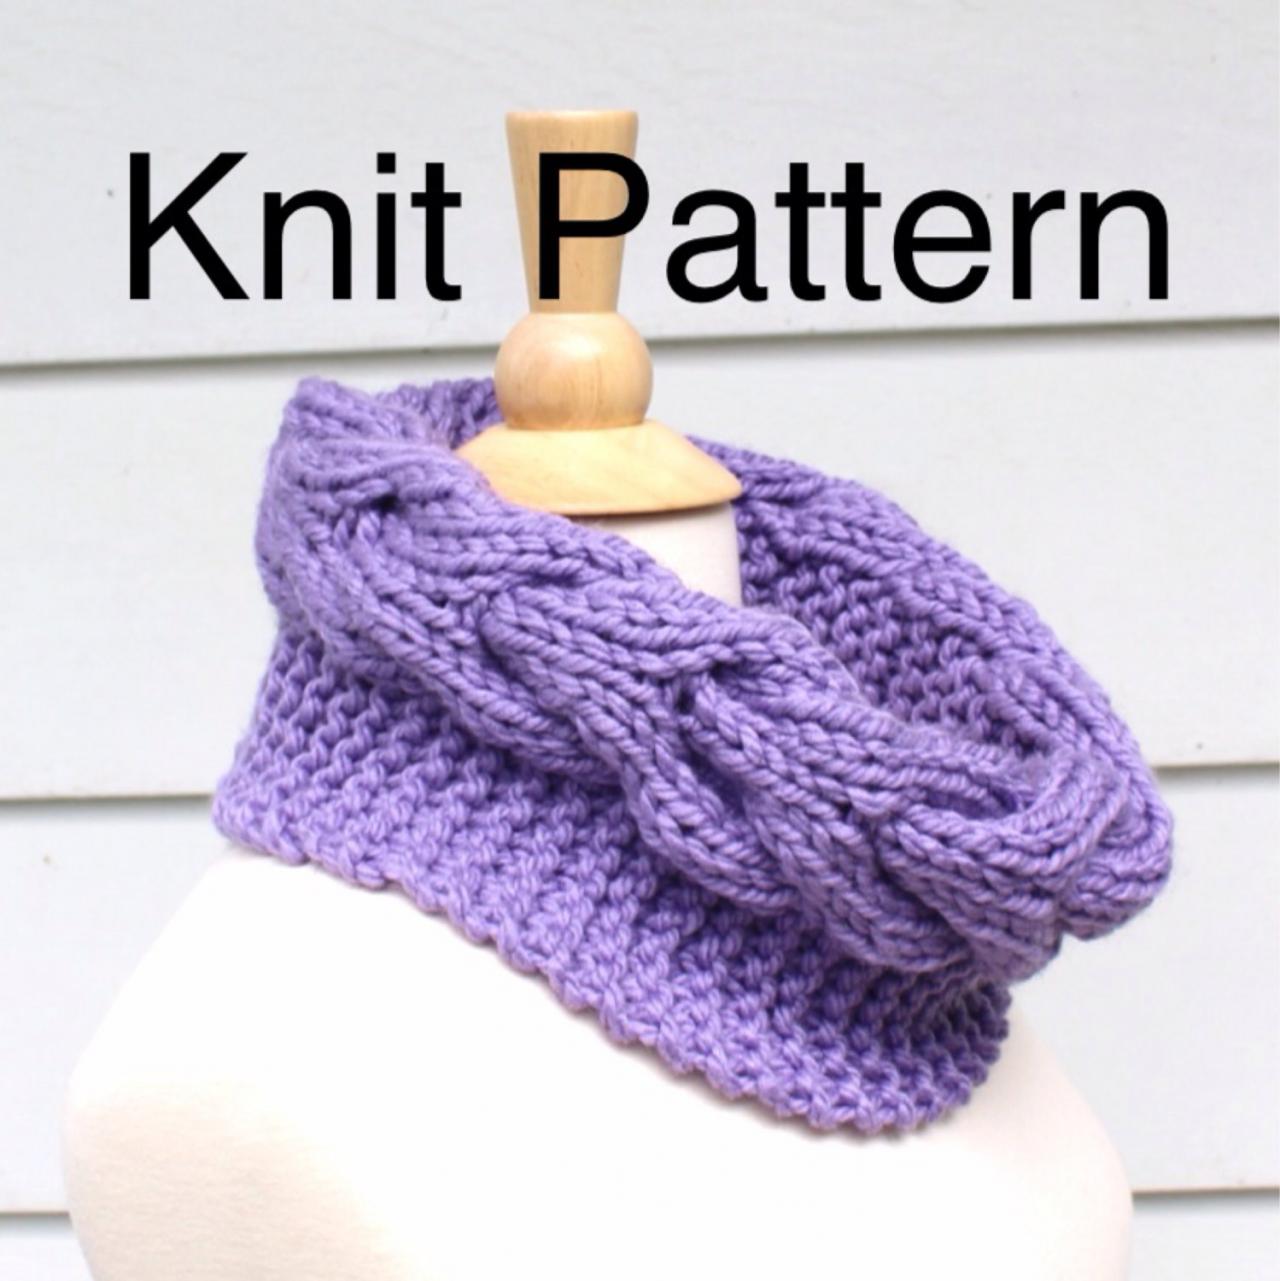 Knit Pattern Cowl Pattern- Hand Knit Cowl Scarf Pattern With A Horseshoe Cable - Chunky Scarf Pattern - Pdf